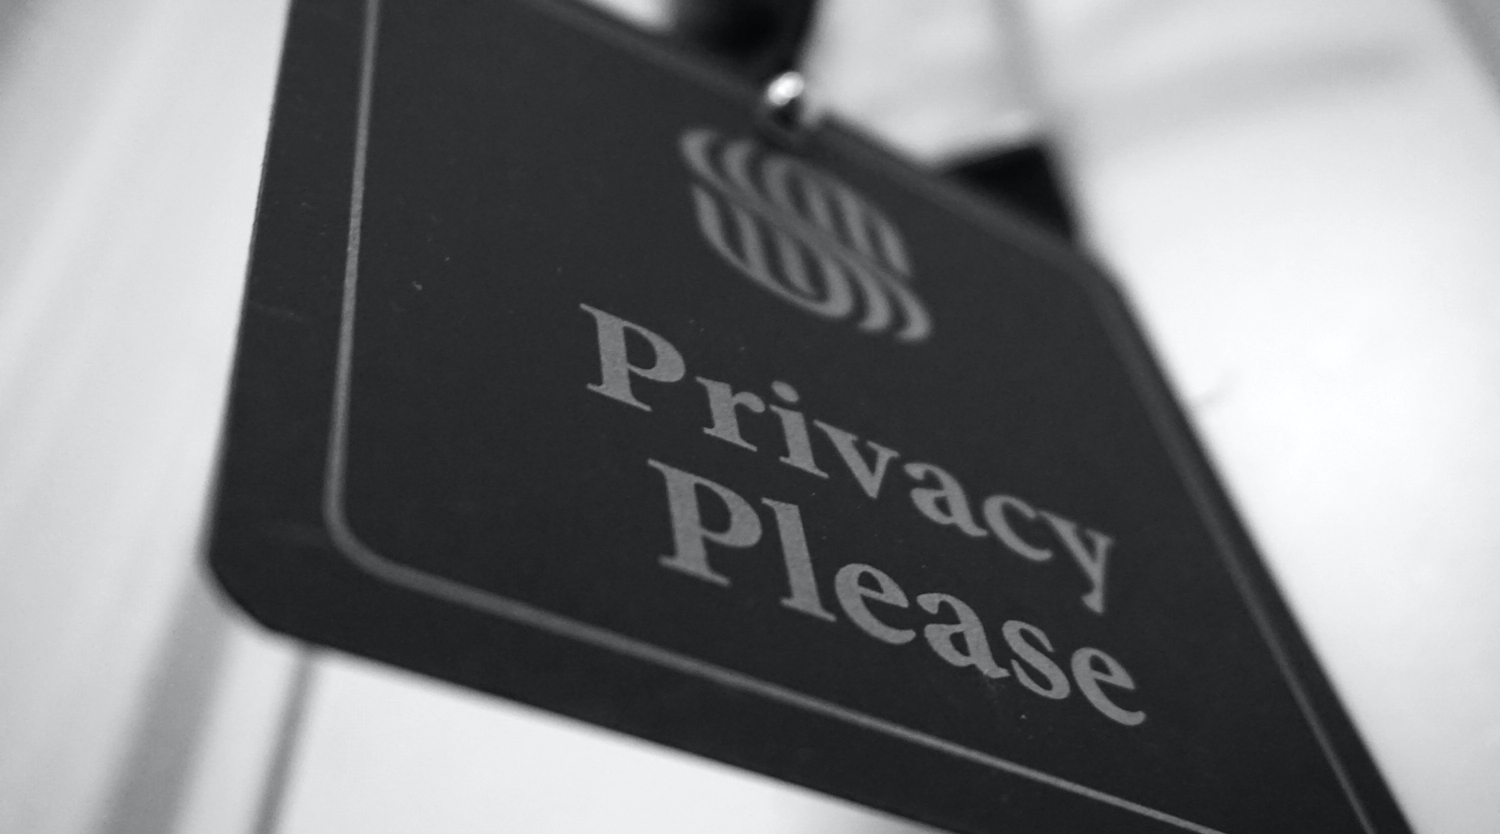 Kenya Data Protection Compliance Guide: The Privacy Principle